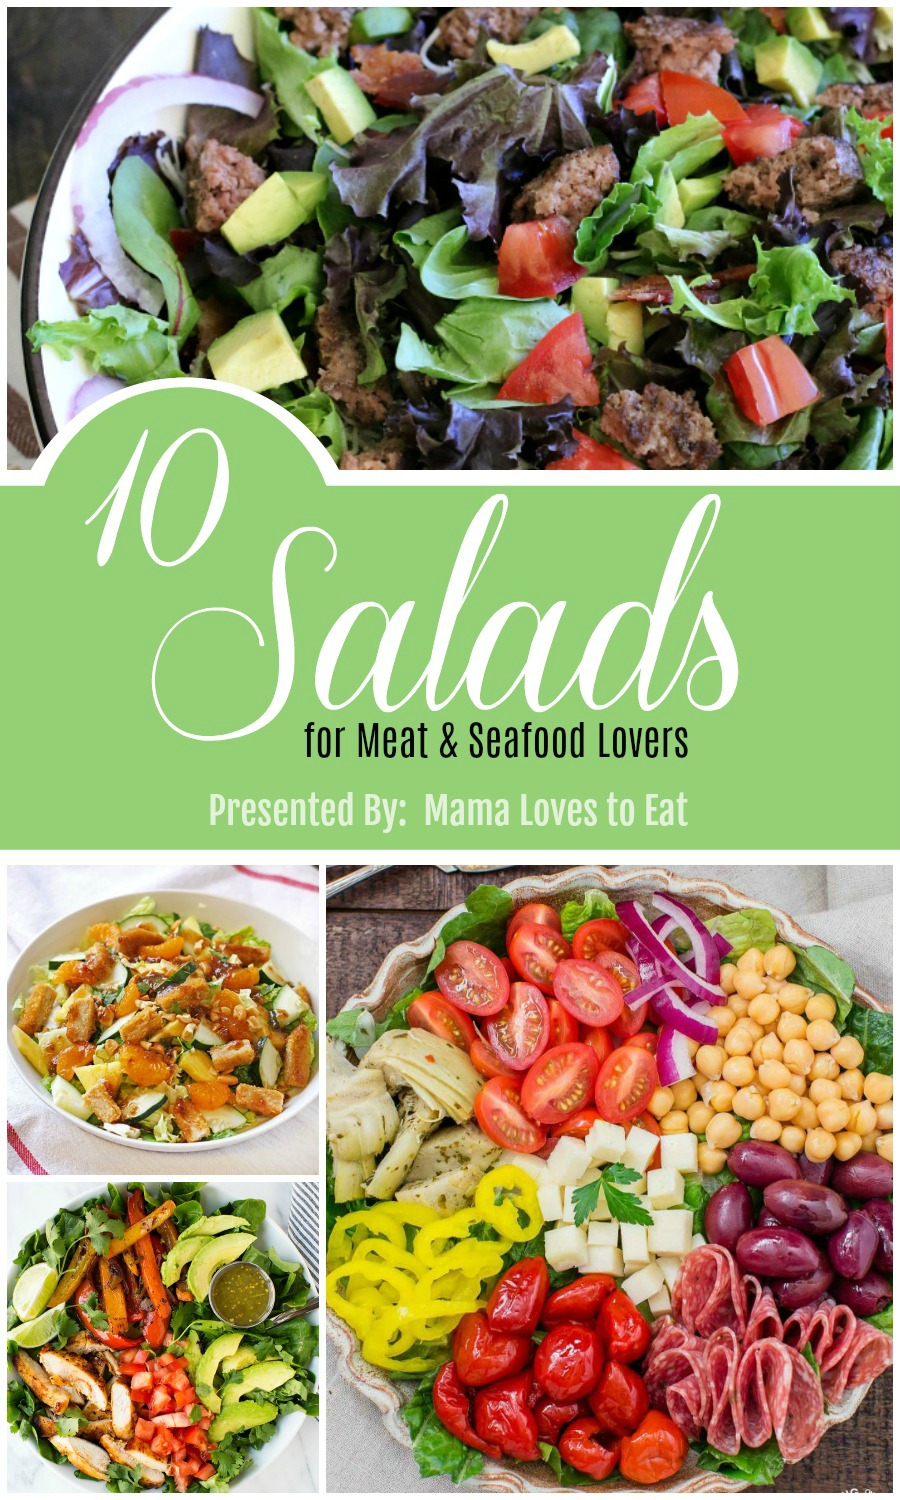 Looking for a great tasting salad topped with meat or seafood? Here are 12 delicious green leafy salads you will love.